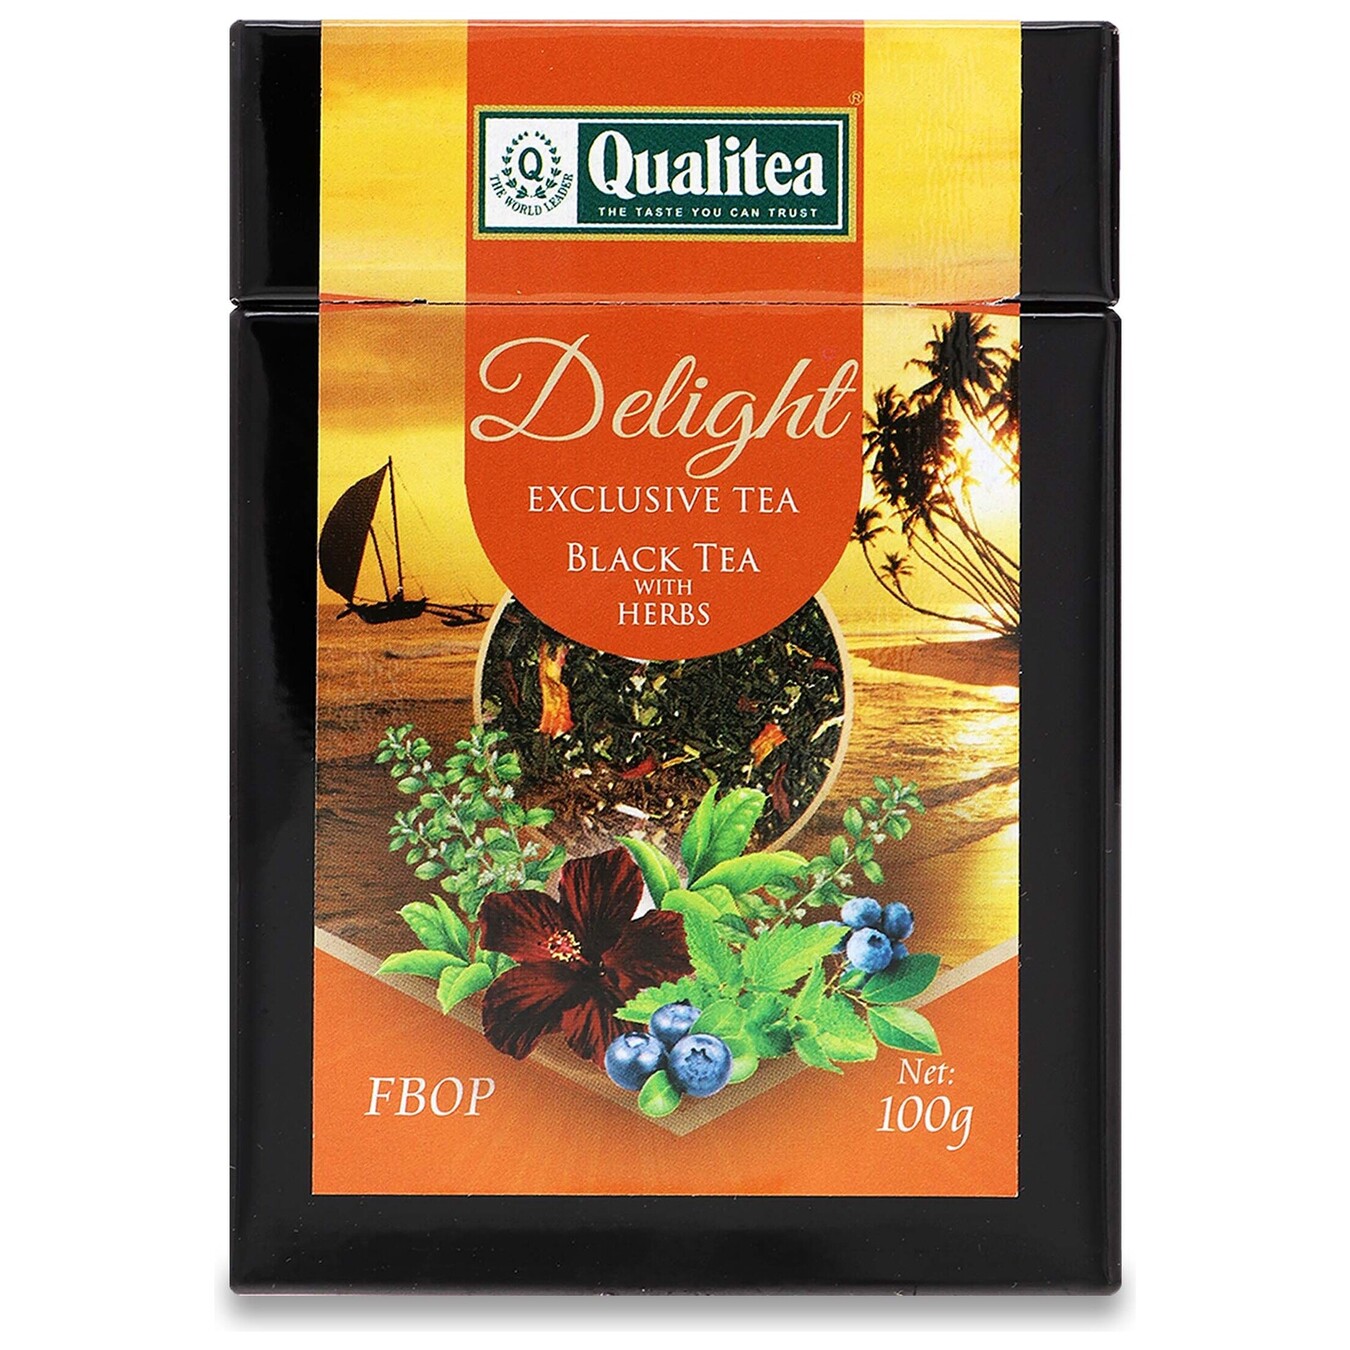 Delight black tea Quality medium leaf with herbs, hibiscus petals and blueberry aroma 100g